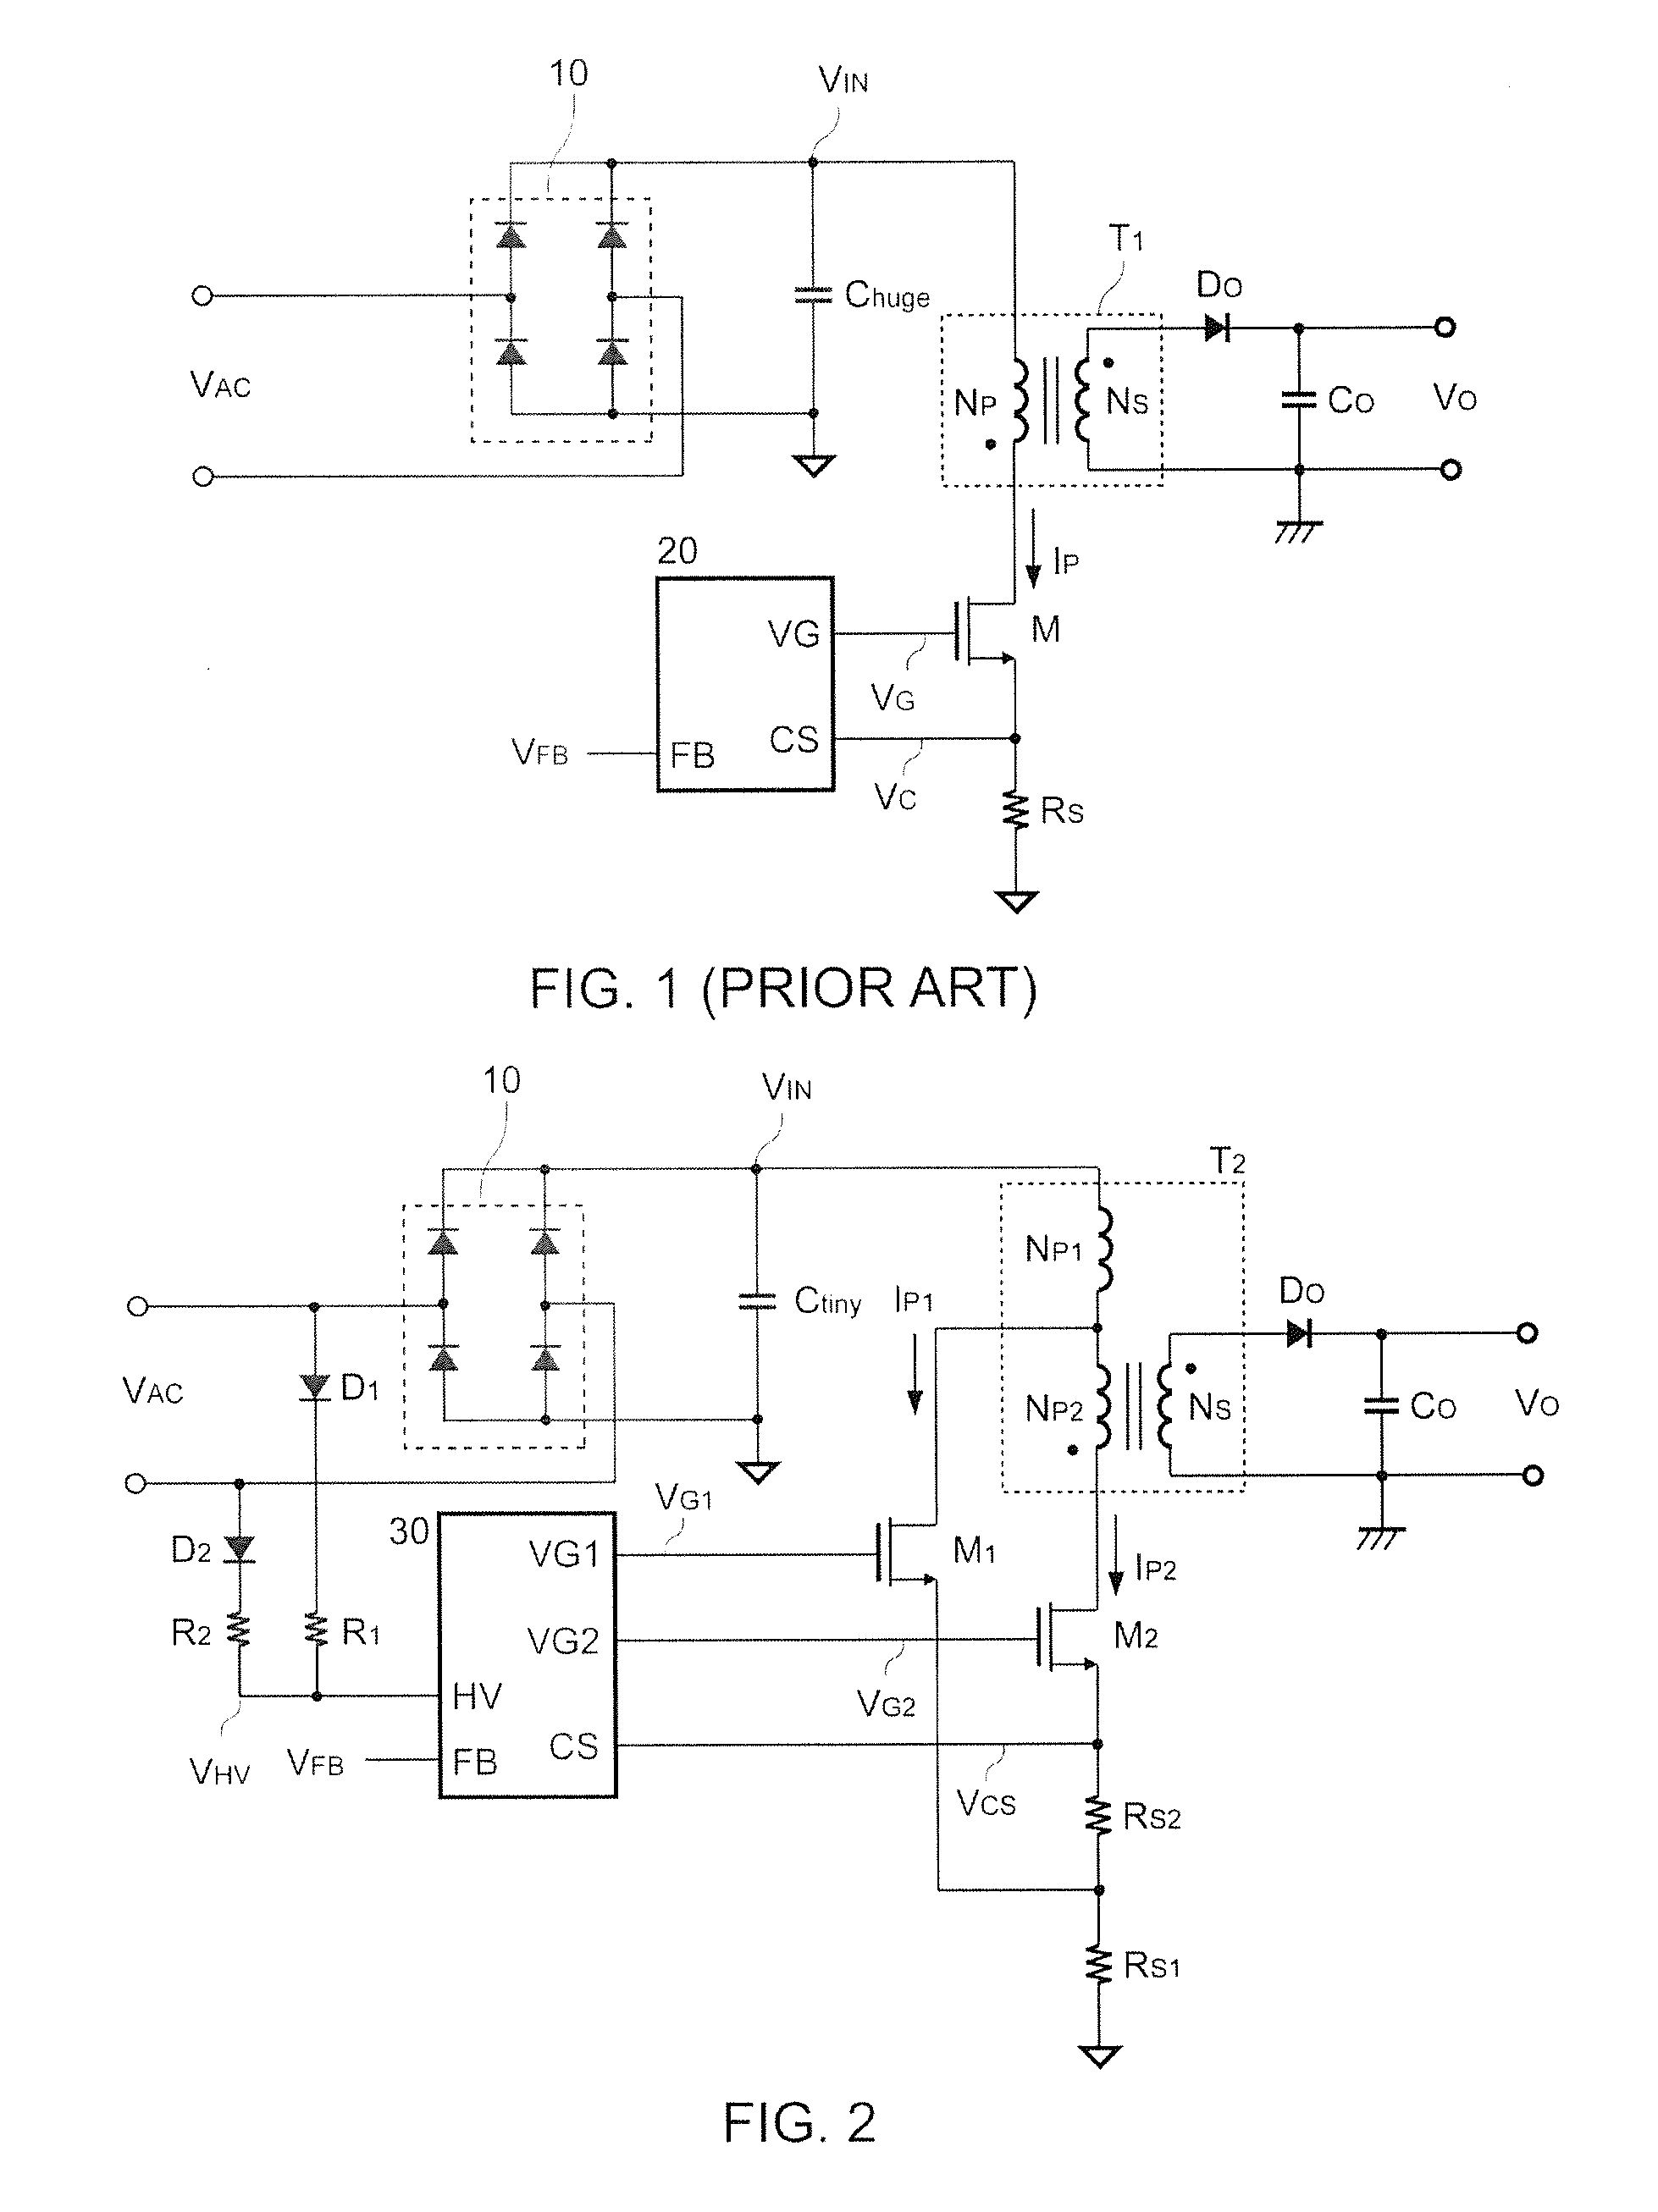 Two-switch flyback power converters